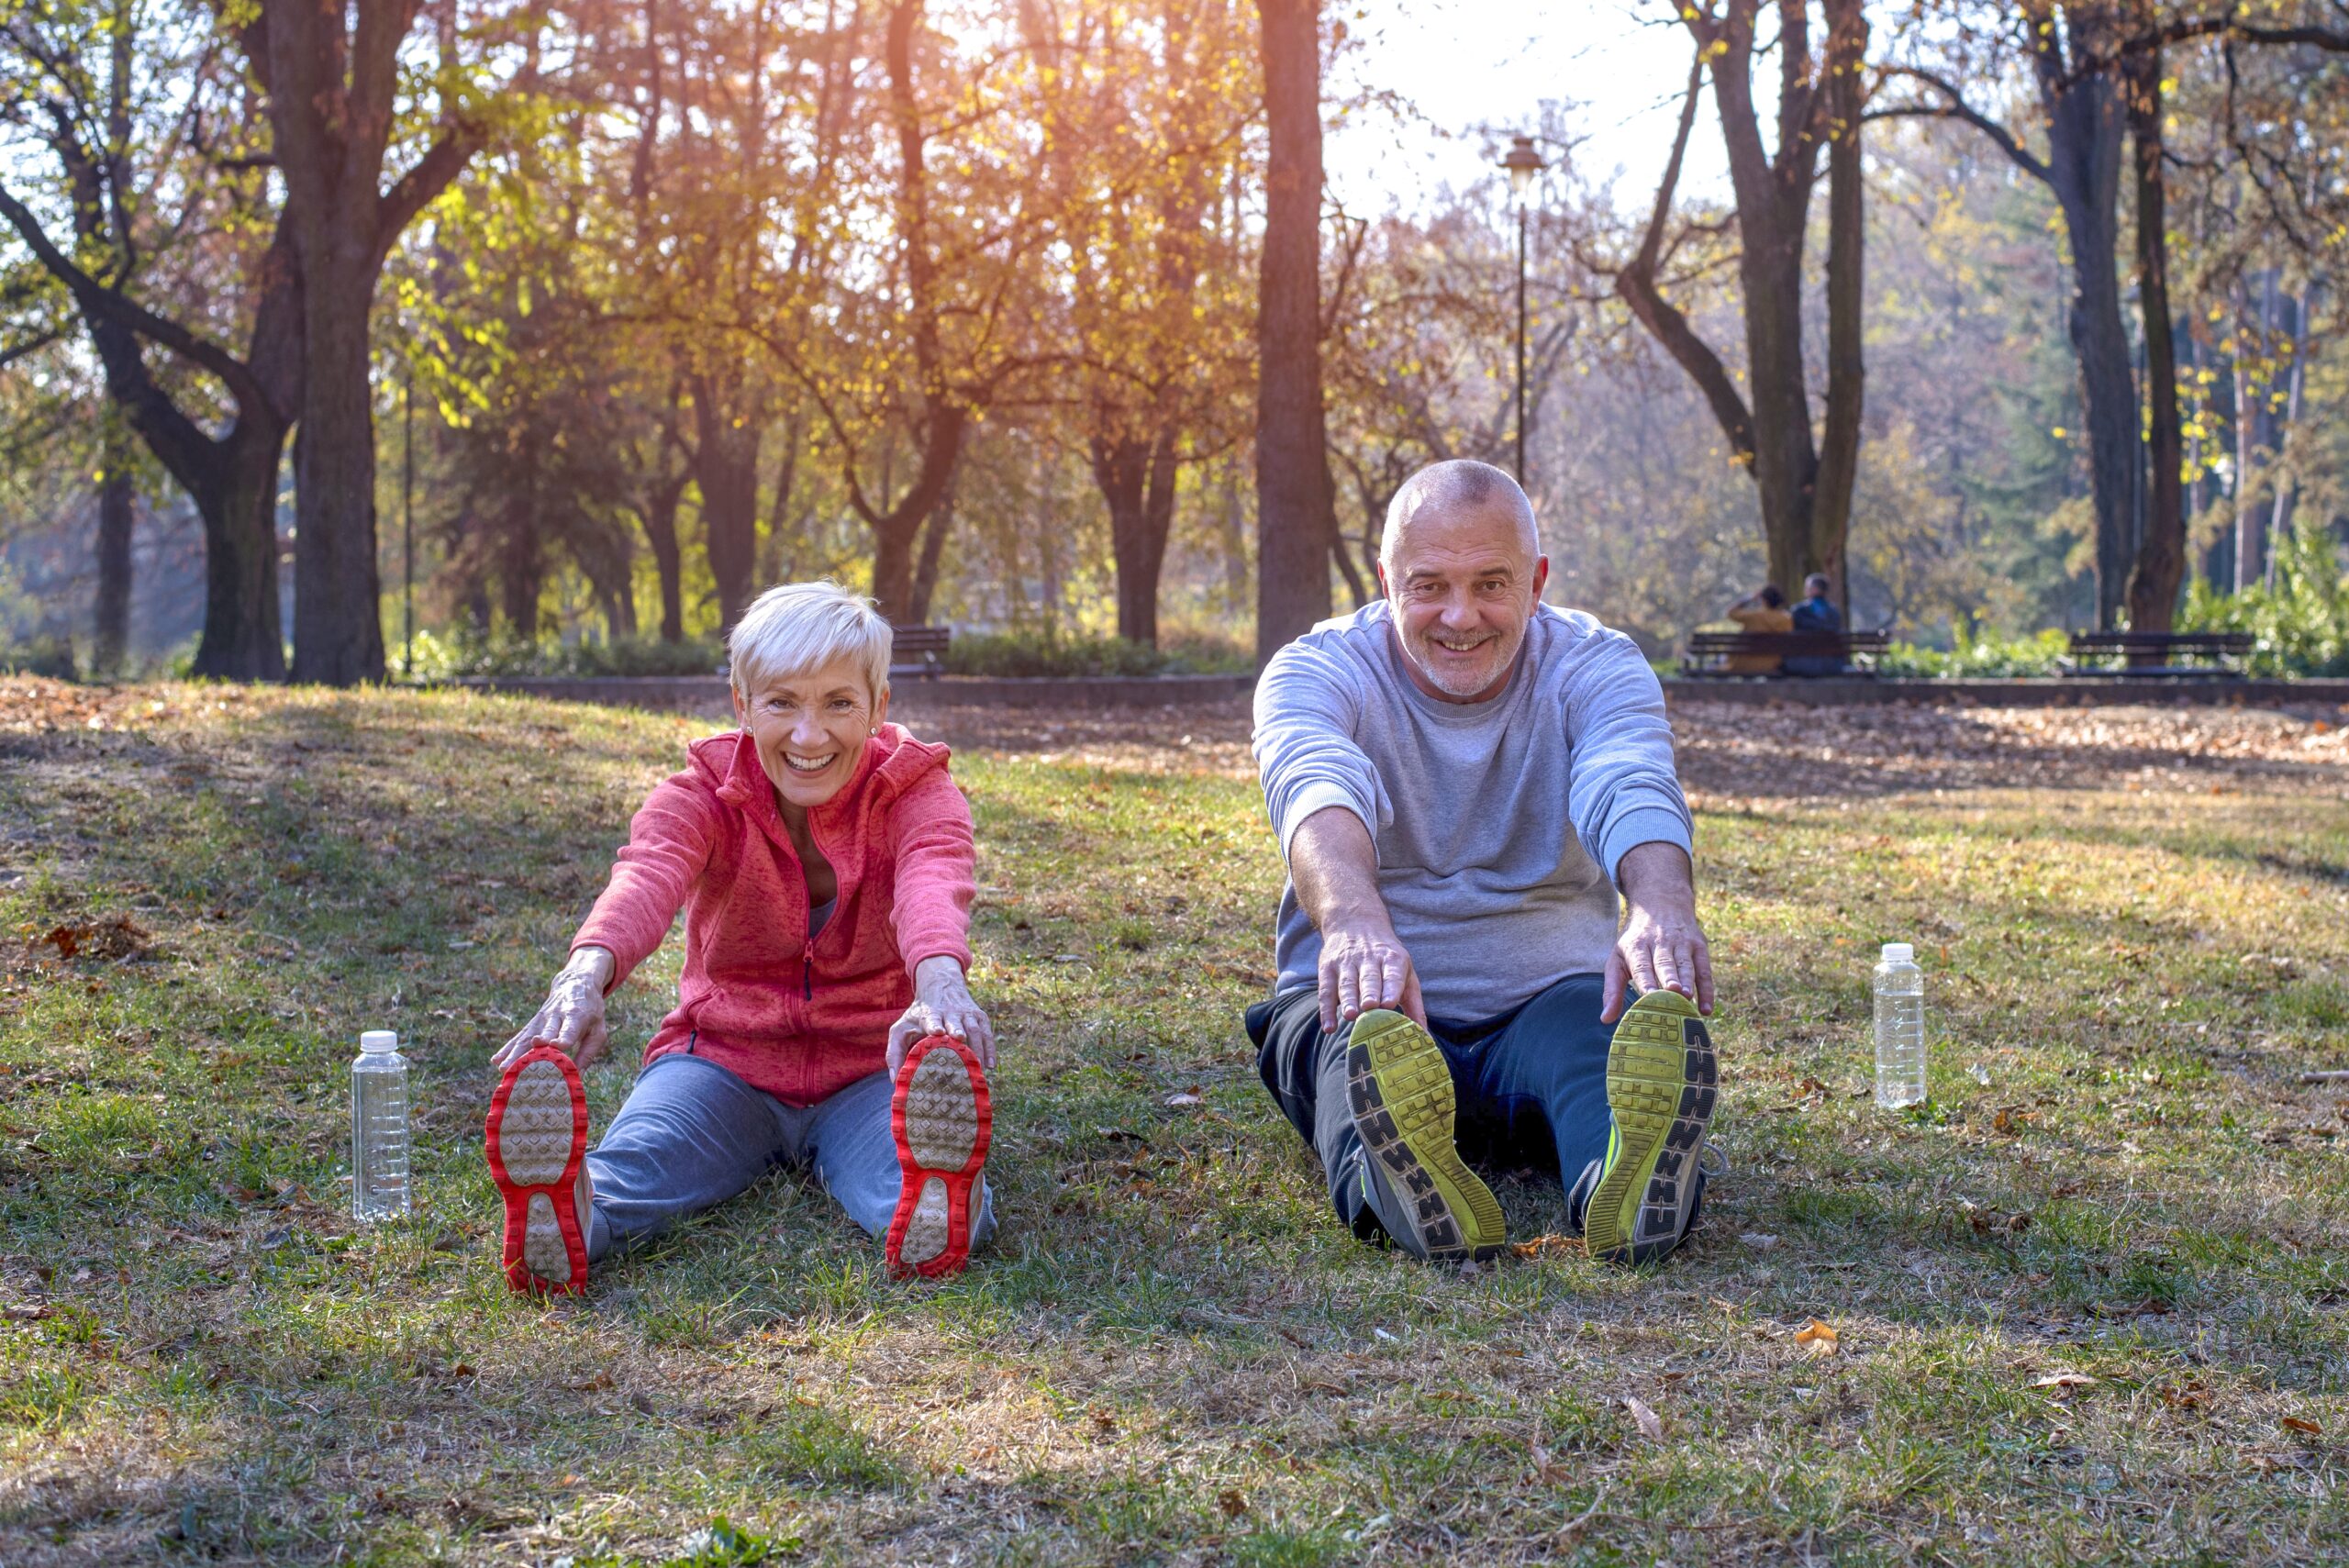 Activities for seniors to maintain their health